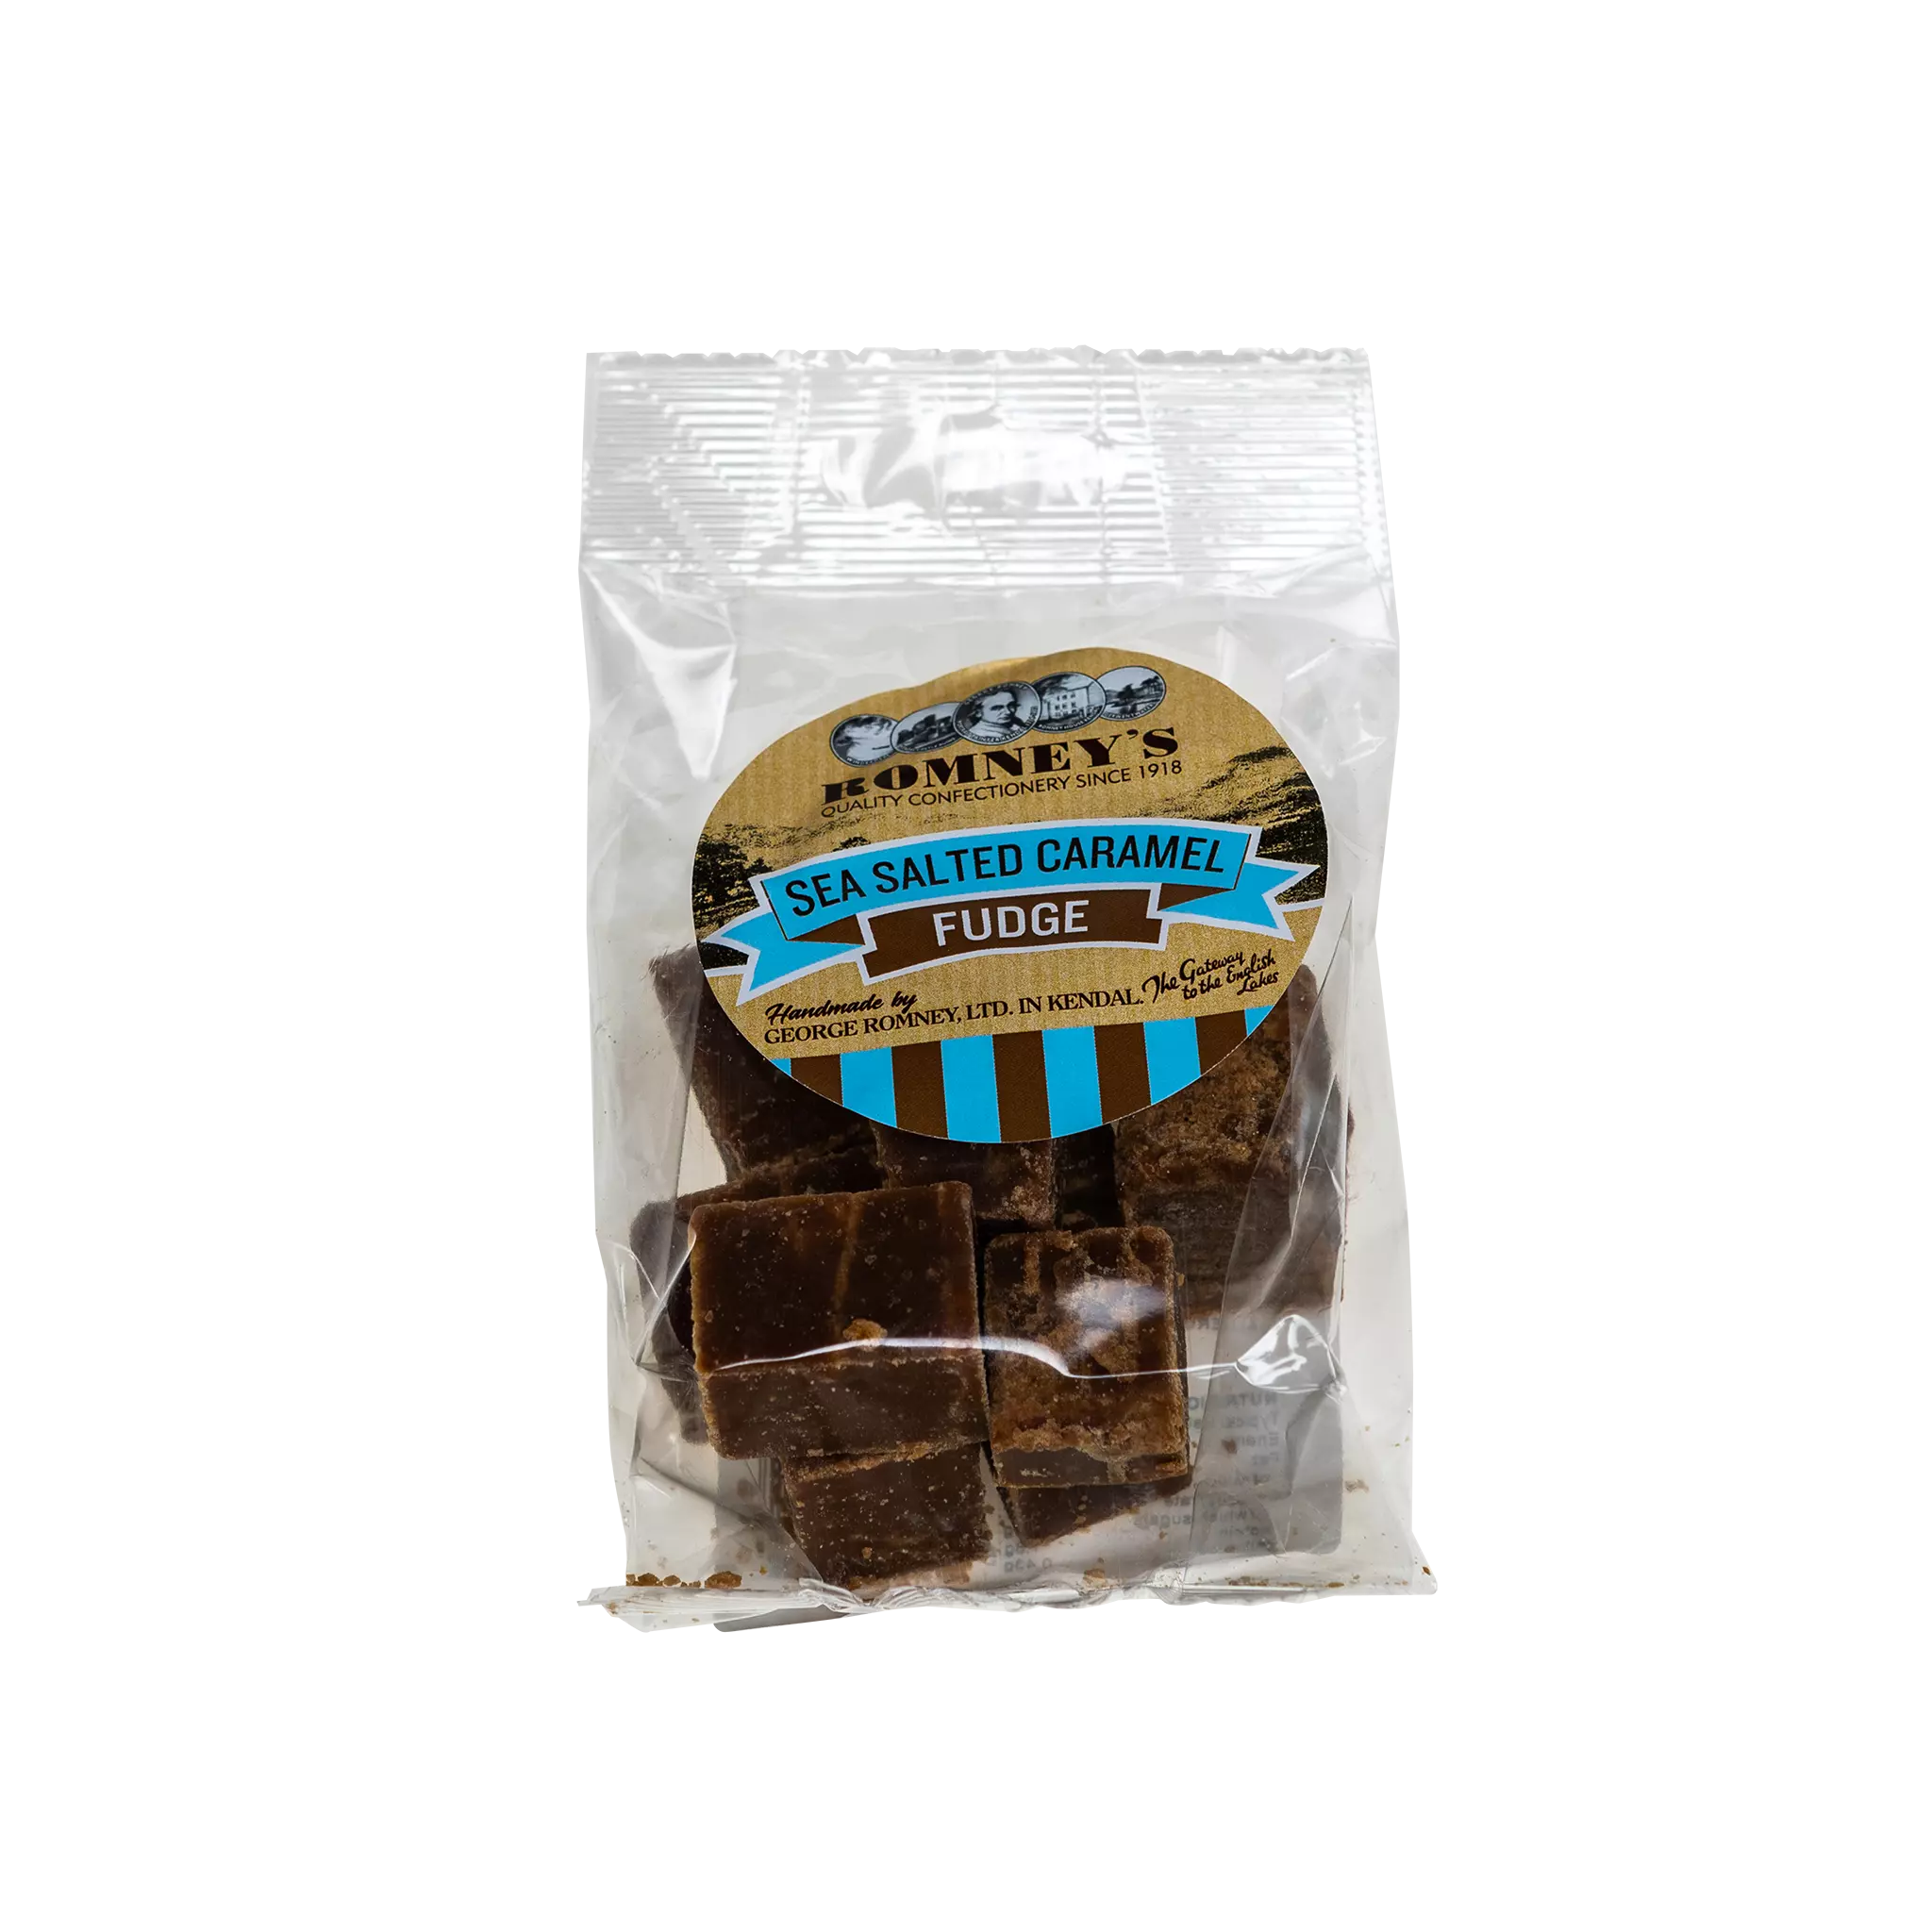 A transparent bag containing pieces of Fudge. The bag has a label on it that shows Romney's logo and says 'Sea Salted Caramel Fudge'.